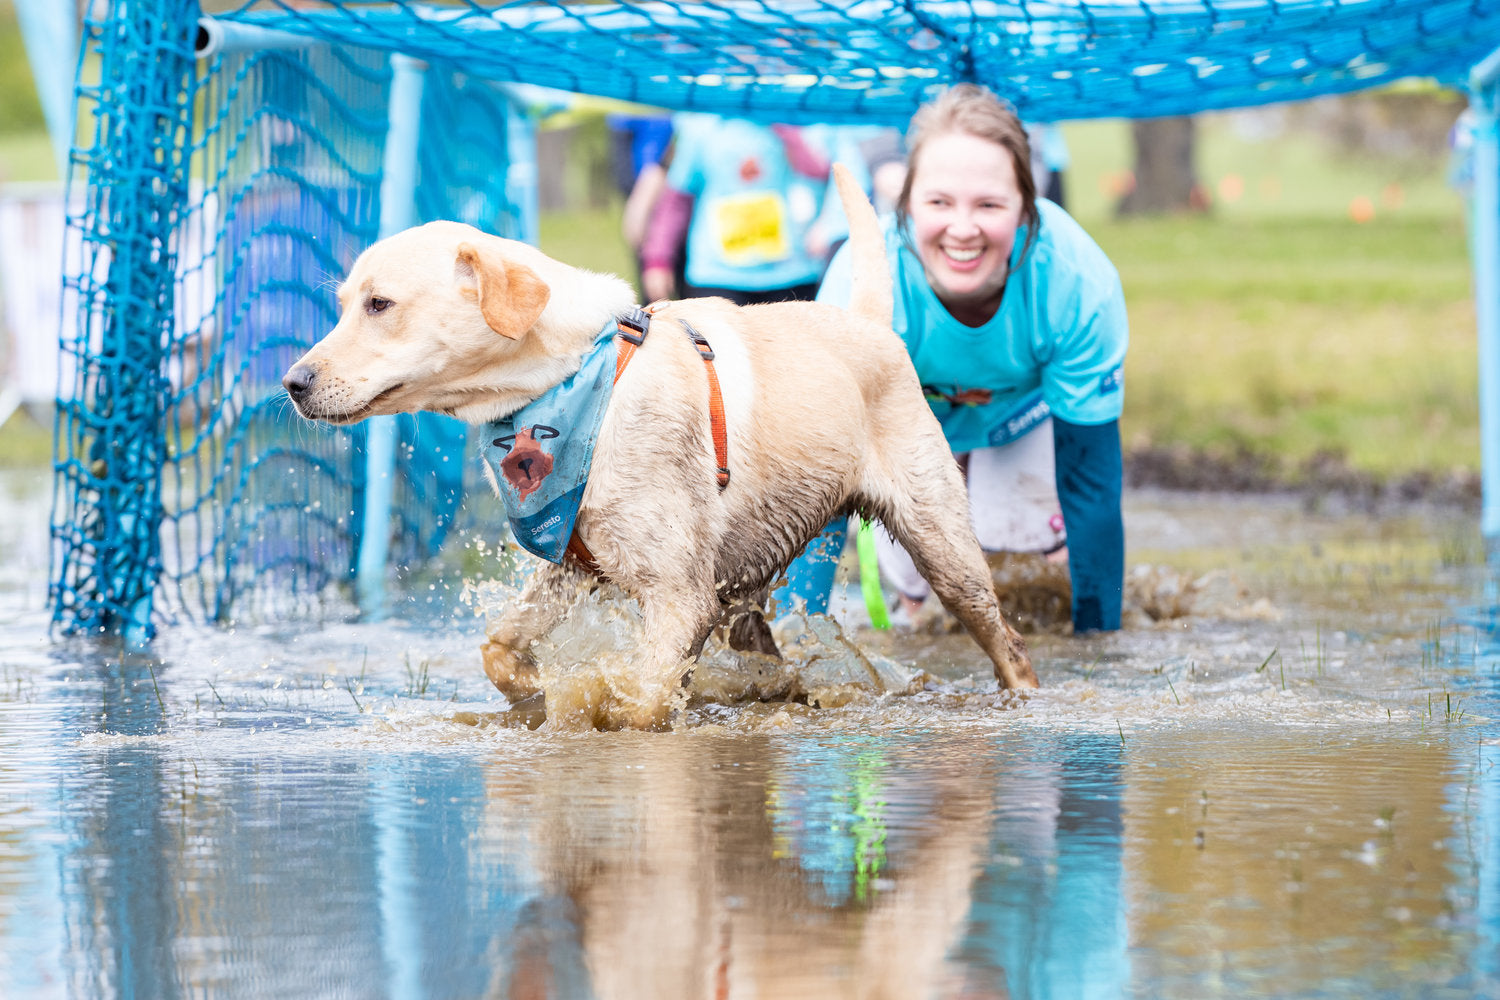 Muddy dog challenge with battersea